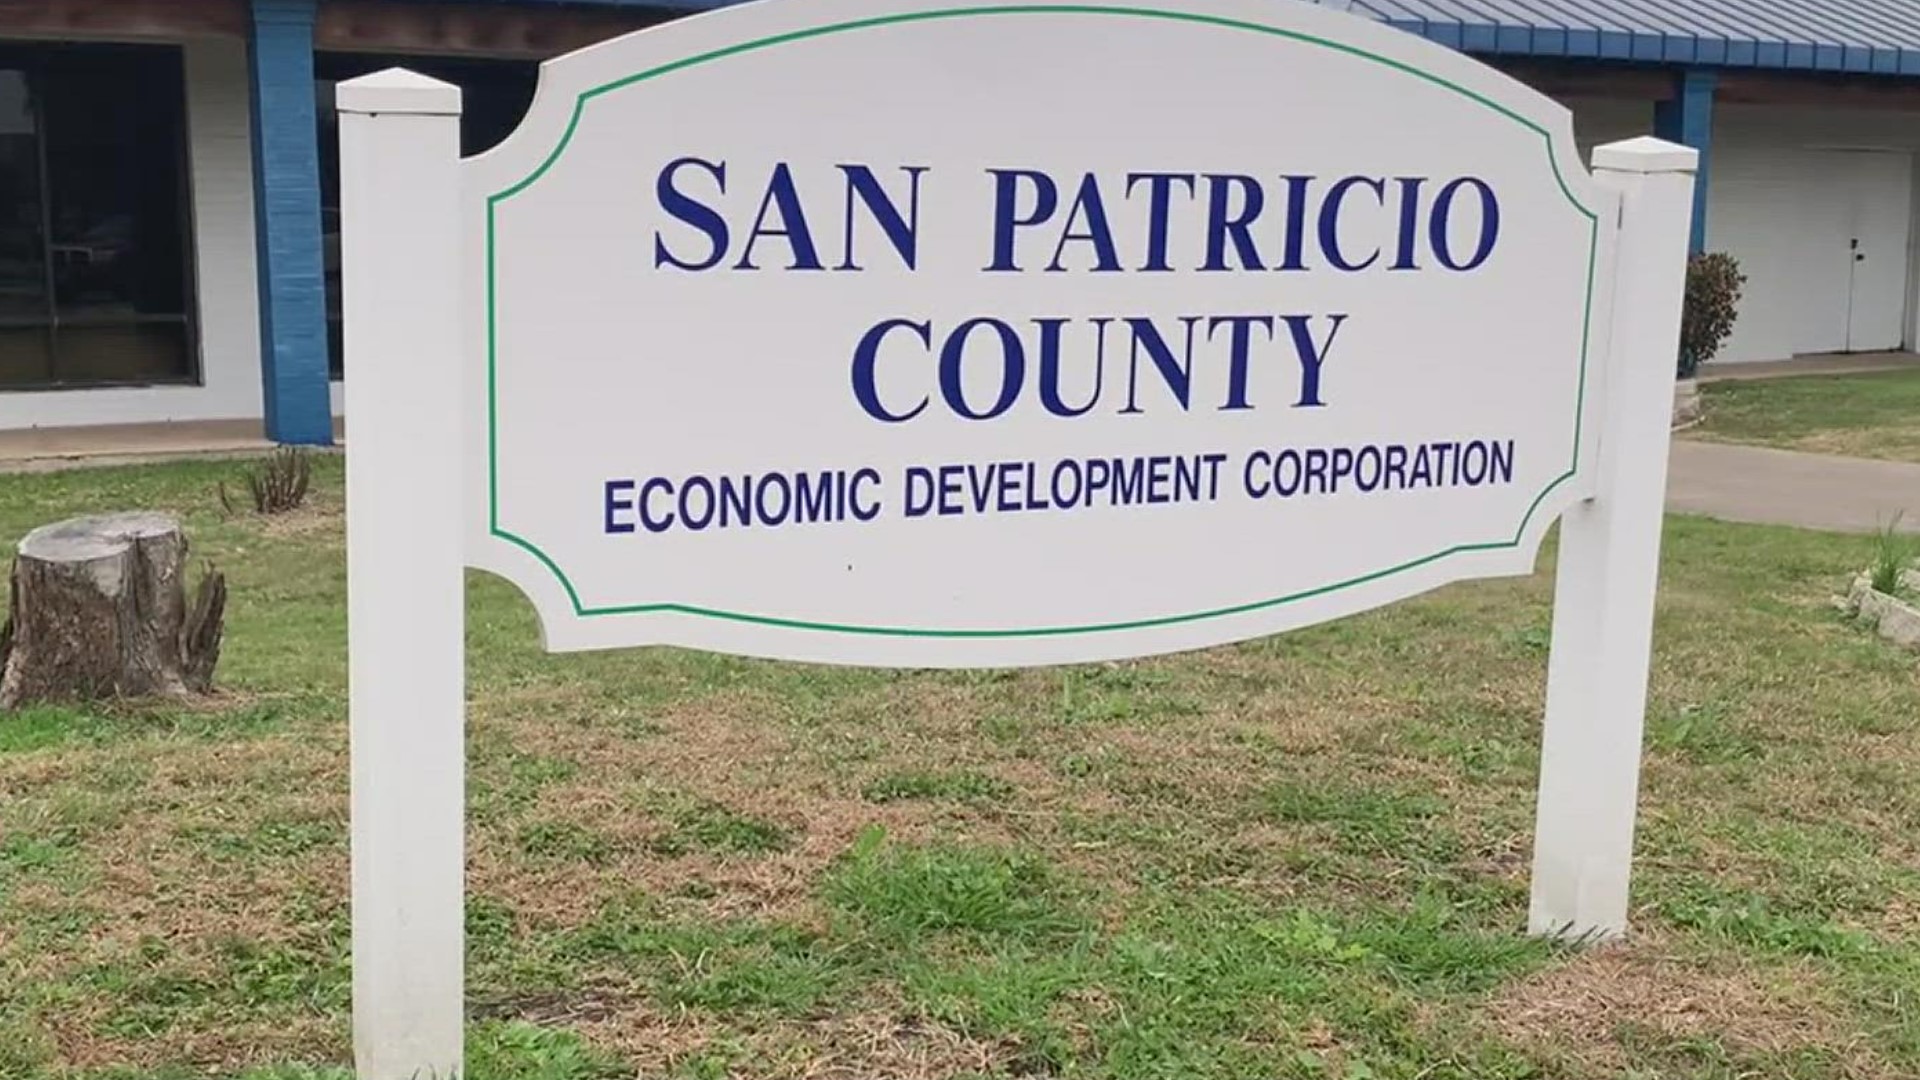 Many jobs could be coming to the area.